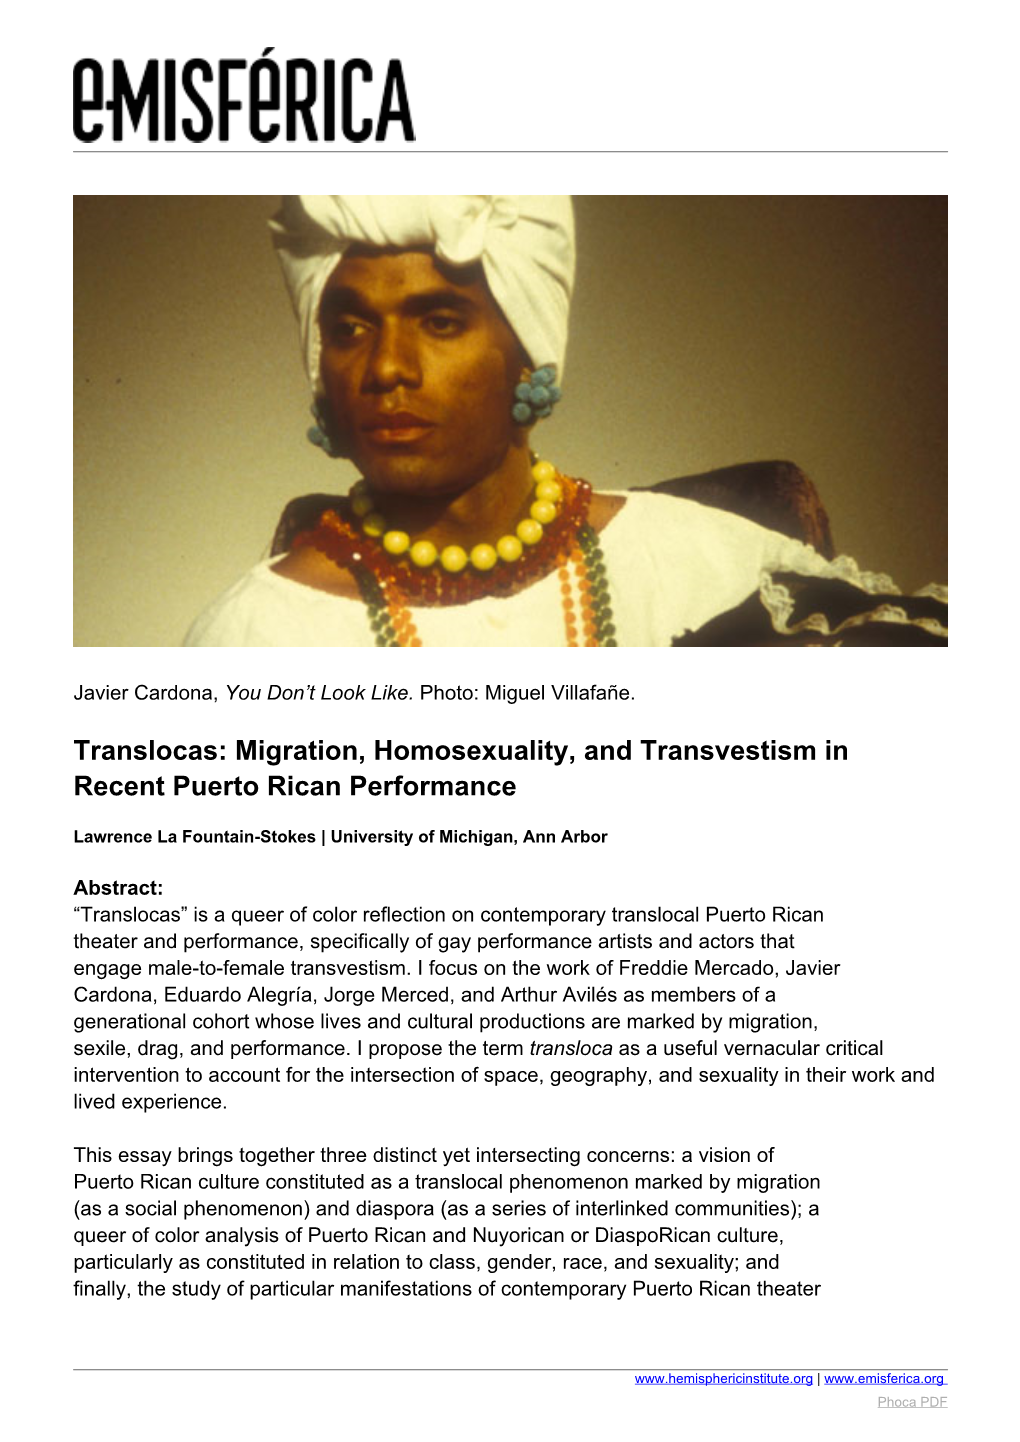 Translocas: Migration, Homosexuality, and Transvestism in Recent Puerto Rican Performance